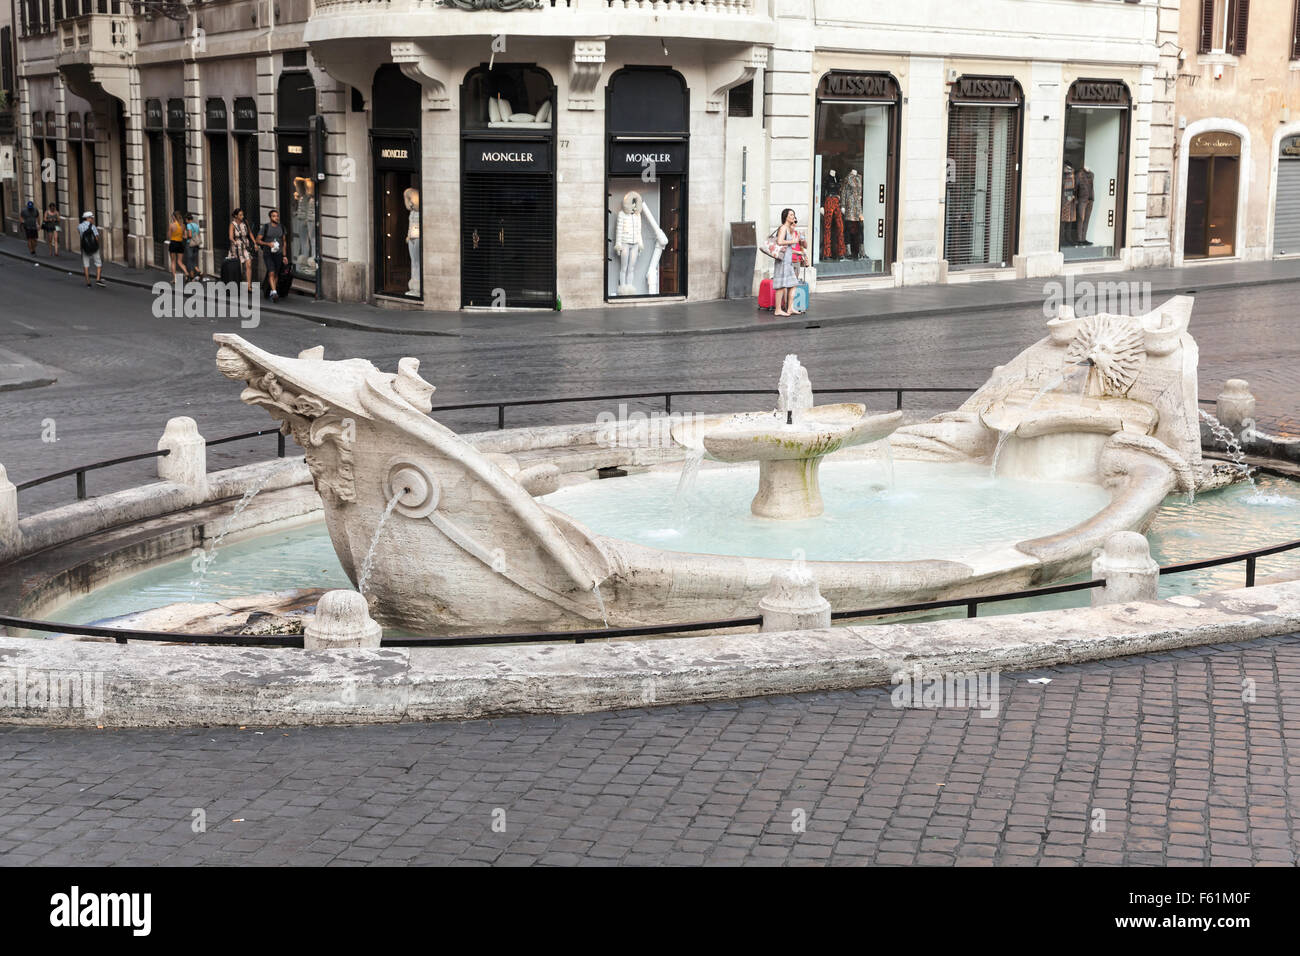 Rome, Italy - August 9, 2015: Fontana della Barcaccia, Fountain on the Piazza di Spagna, street view with walking tourists Stock Photo